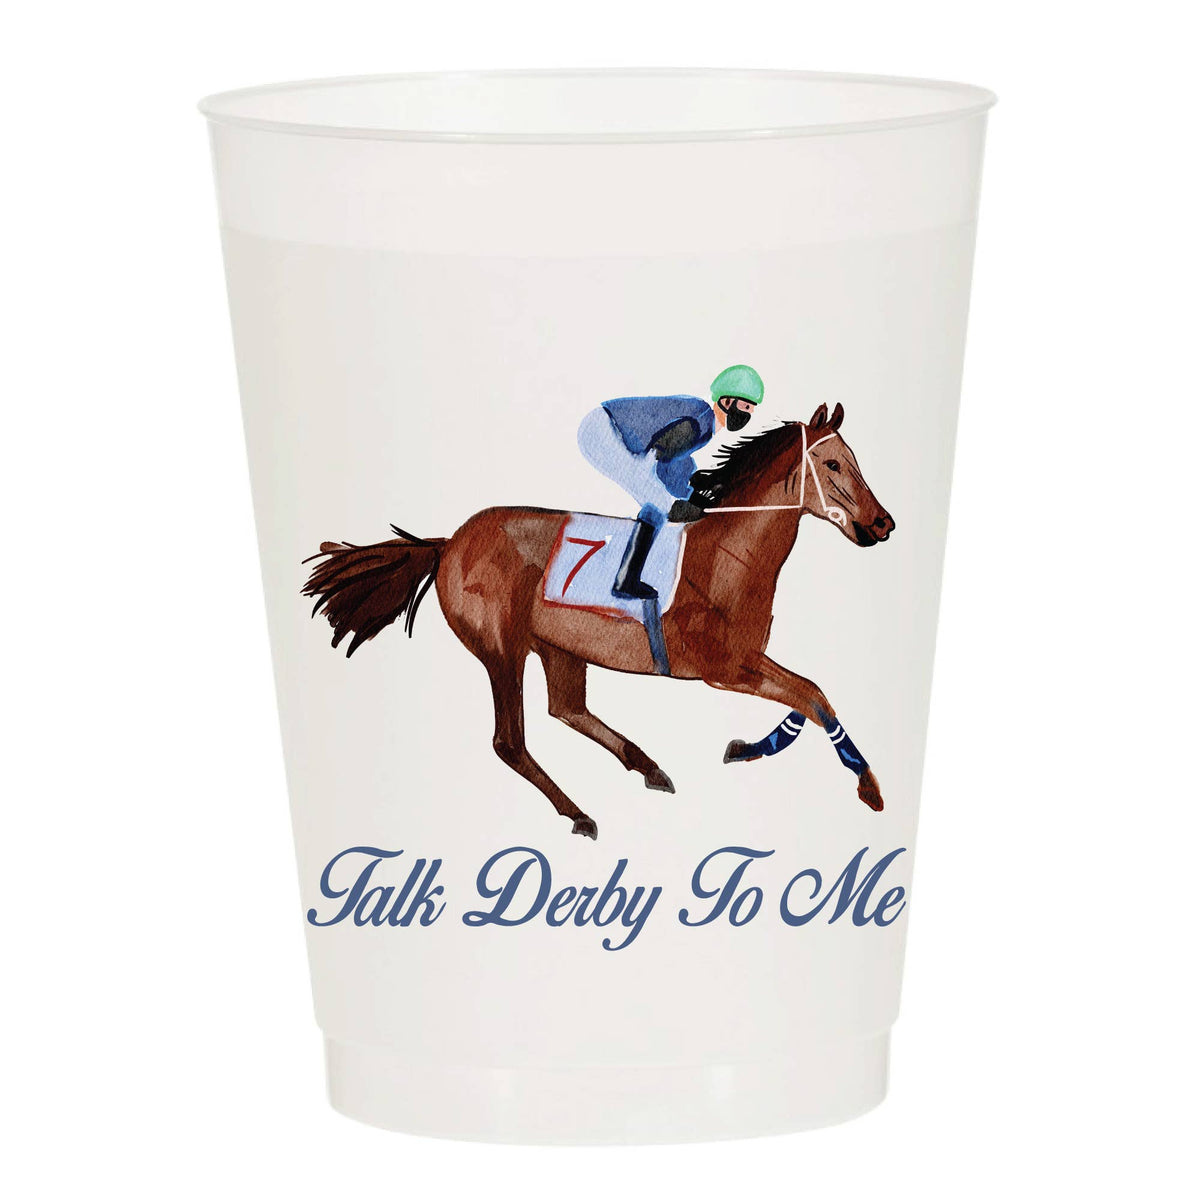 Talk Derby To Me Watercolor Reusable Cups - Set of 10 - The Preppy Bunny